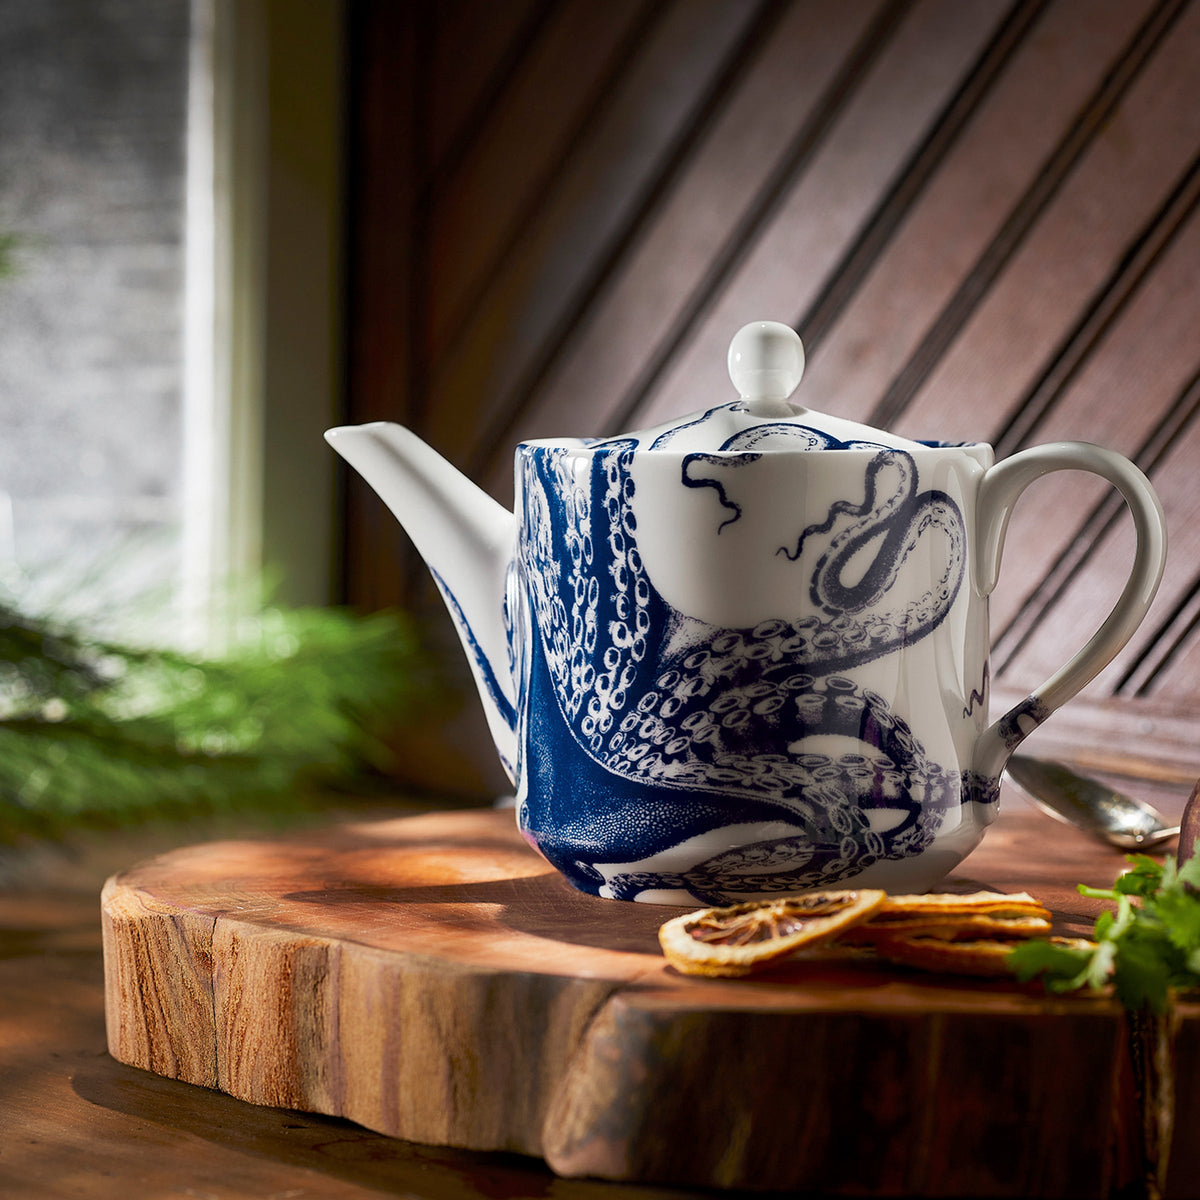 A Lucy Petite Teapot adorned with deepwater whimsy, resting on a wooden cutting board. (Brand Name: Caskata)